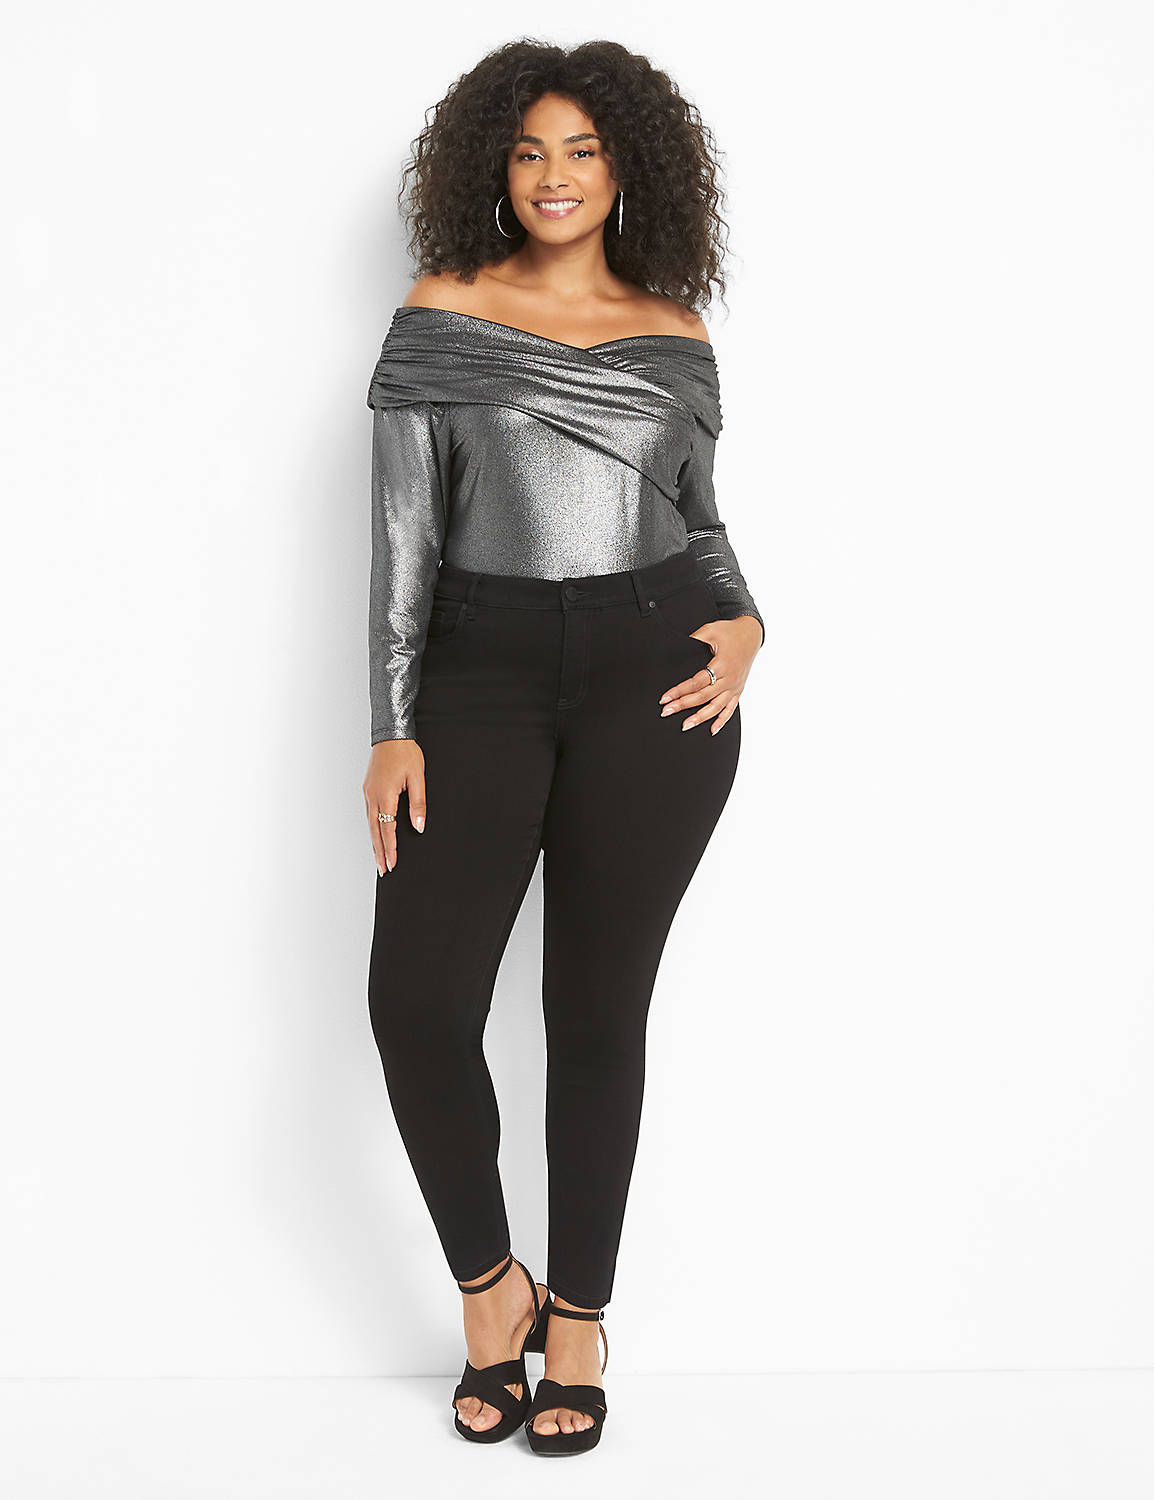 Long Sleeve Off The Shoulder Illusion In Metallic Knit Top 1124646:Metallic Grey:22/24 Product Image 3